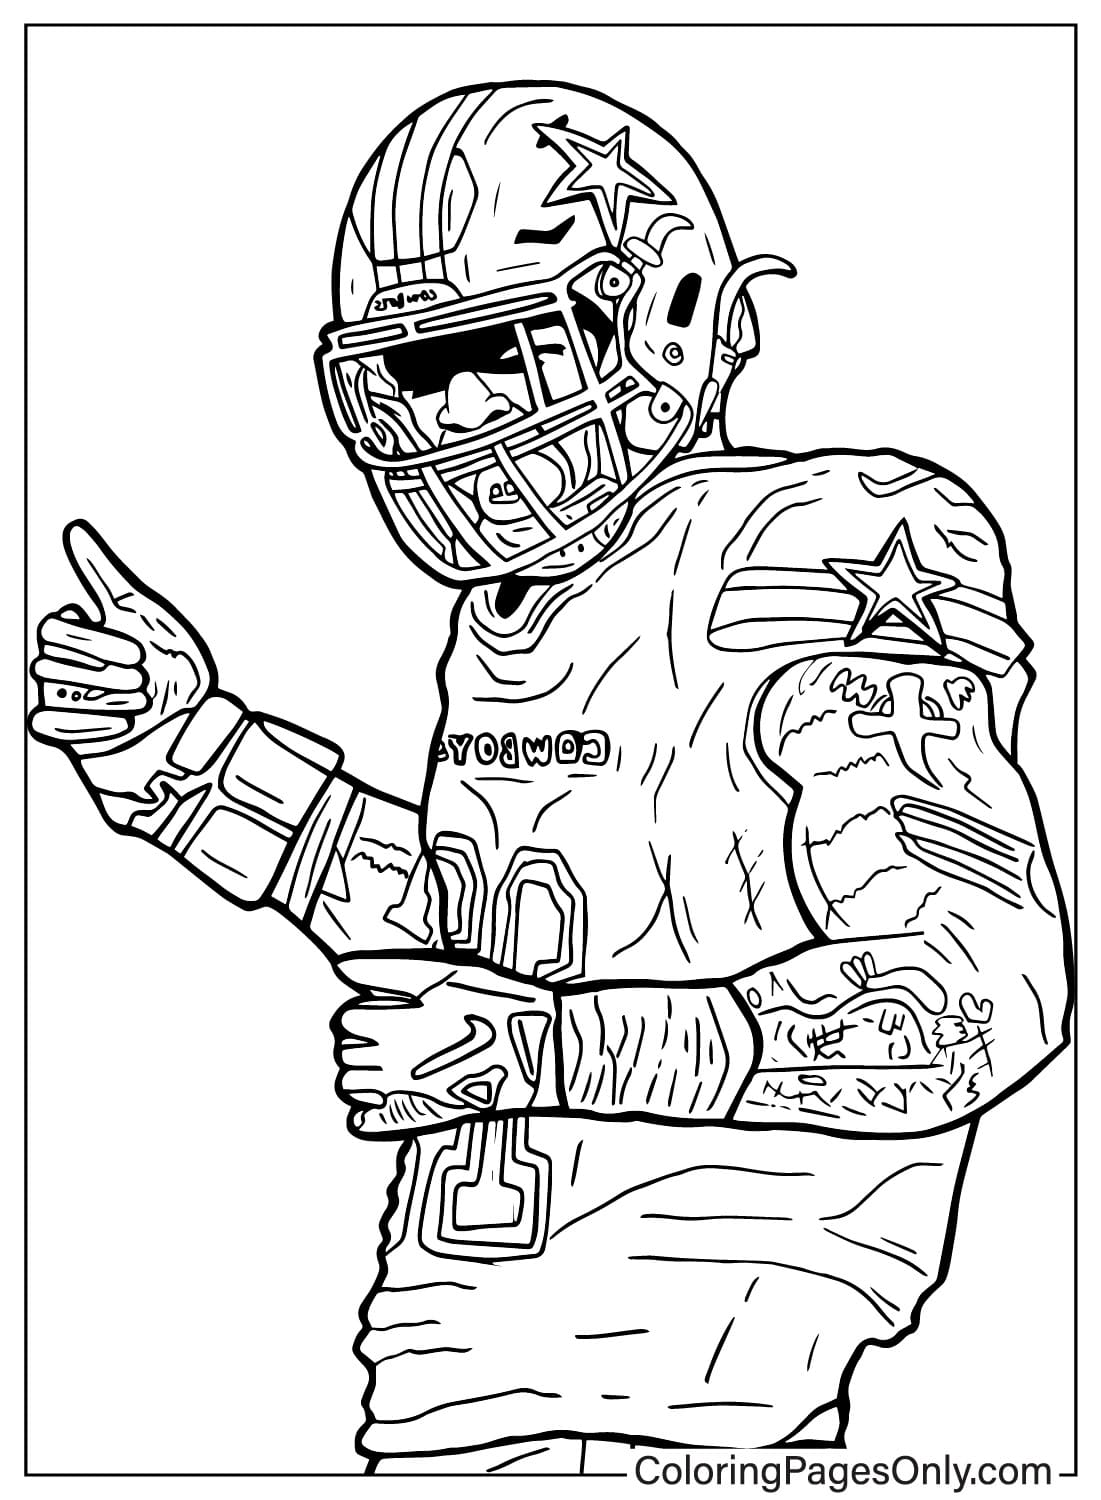 Micah Parsons Coloring Page Free